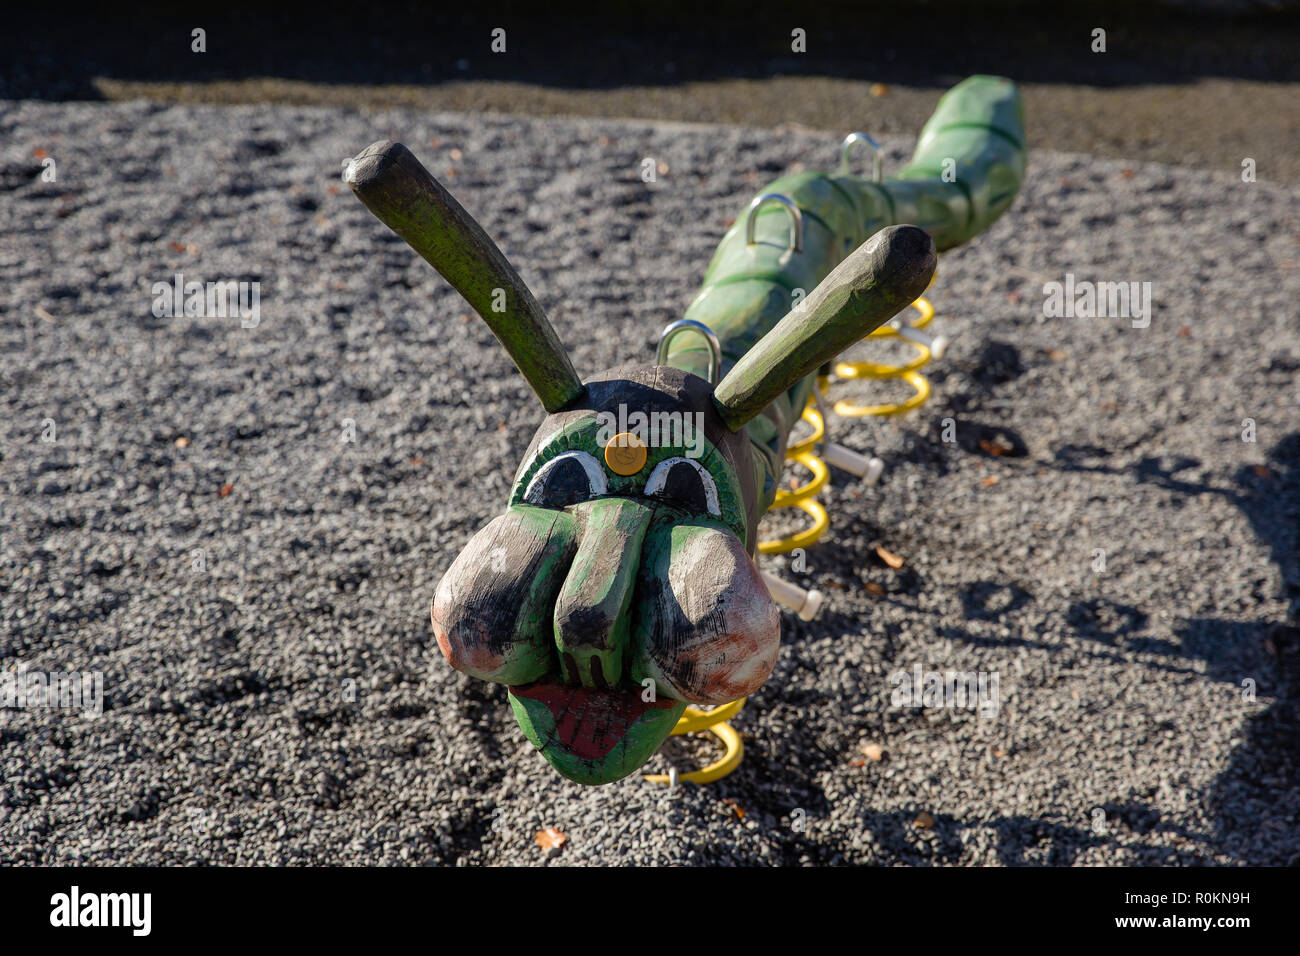 Playground equipment for children to play on - wooden caterpillar on springs. Stock Photo